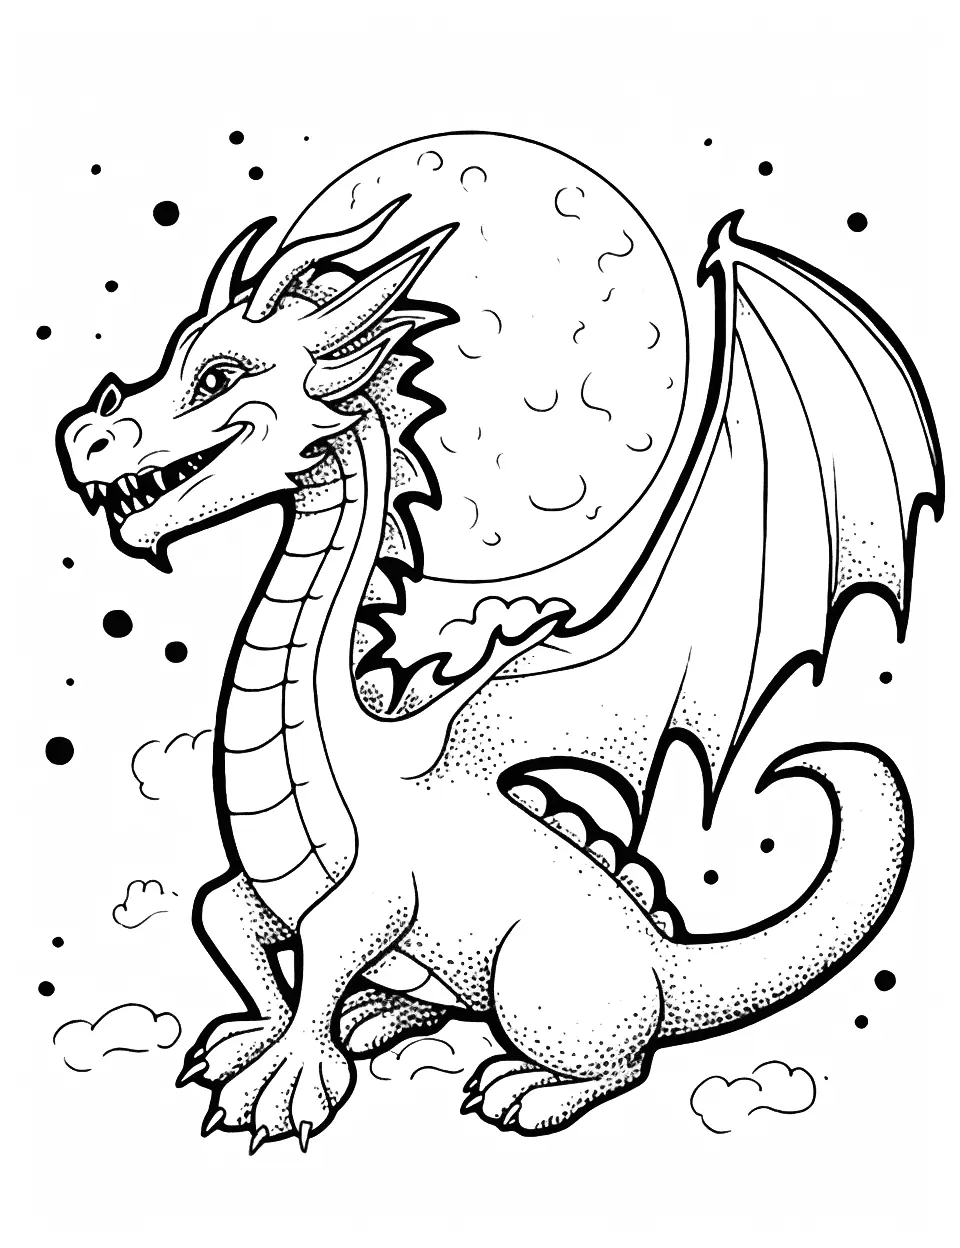 Dragon and Moon Coloring Page - A silhouetted dragon flying across a star-filled night sky with a full moon.